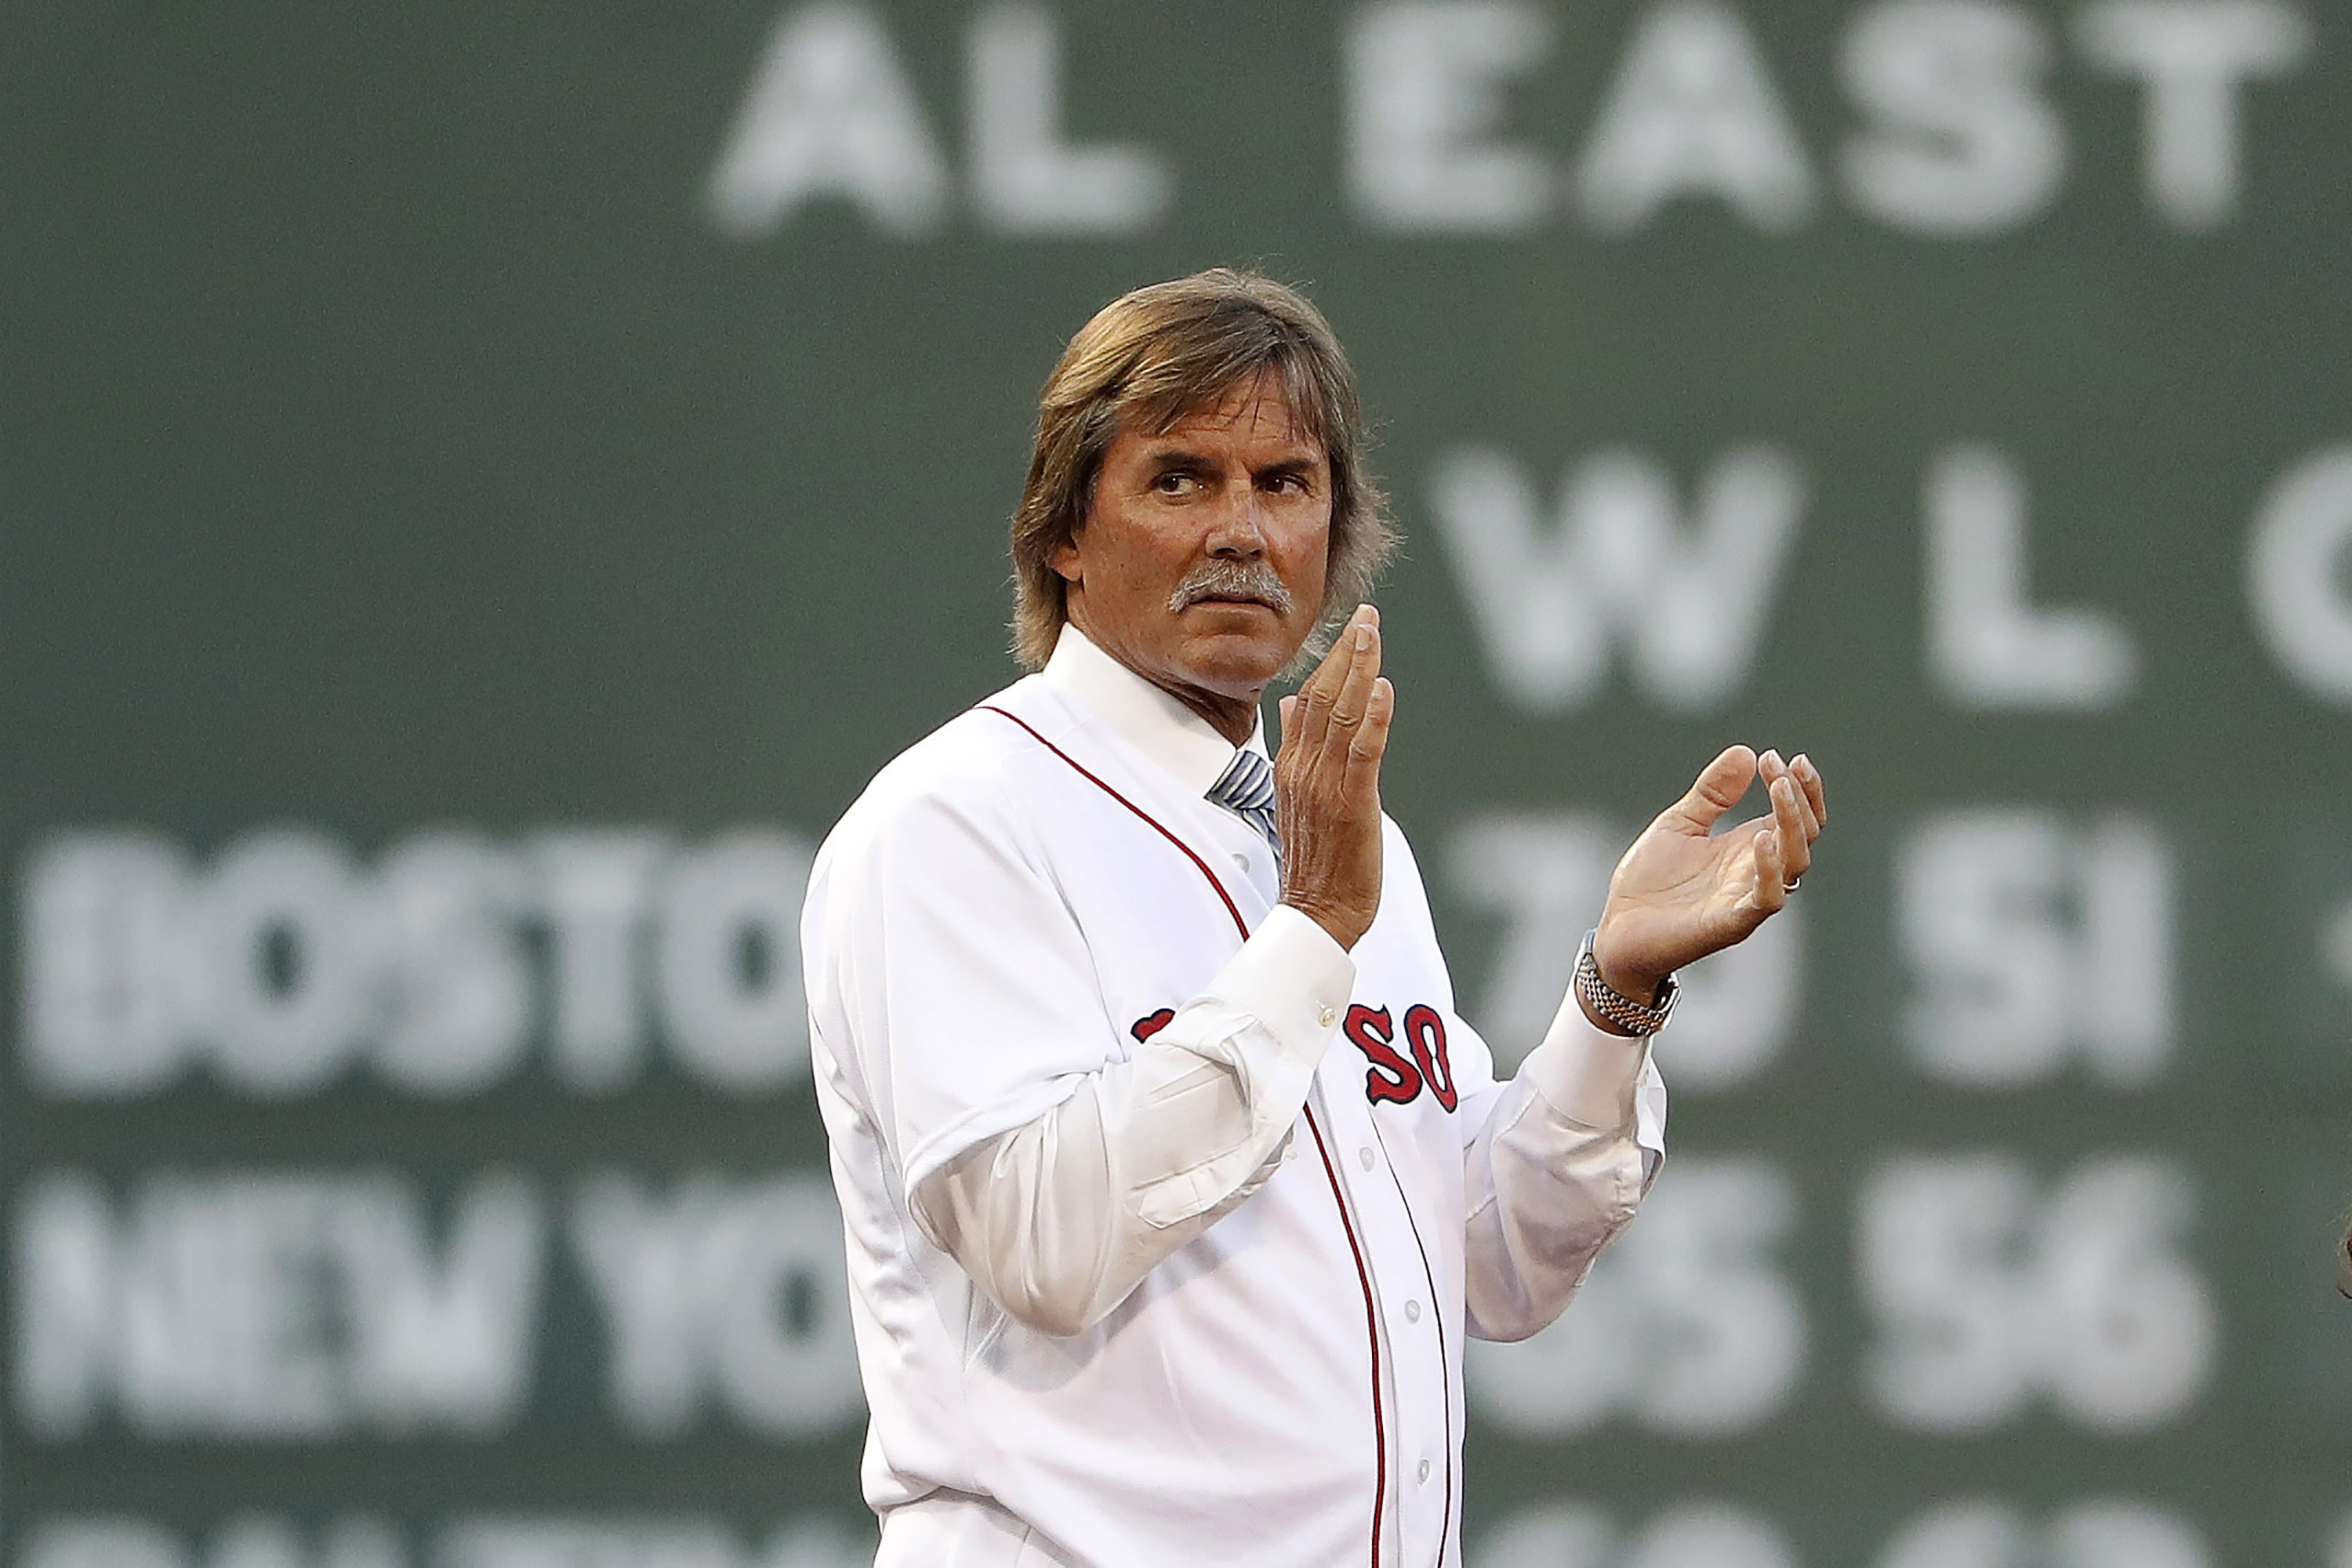 Angelo7266 on X: This is Dennis Eckersley he pitched for the